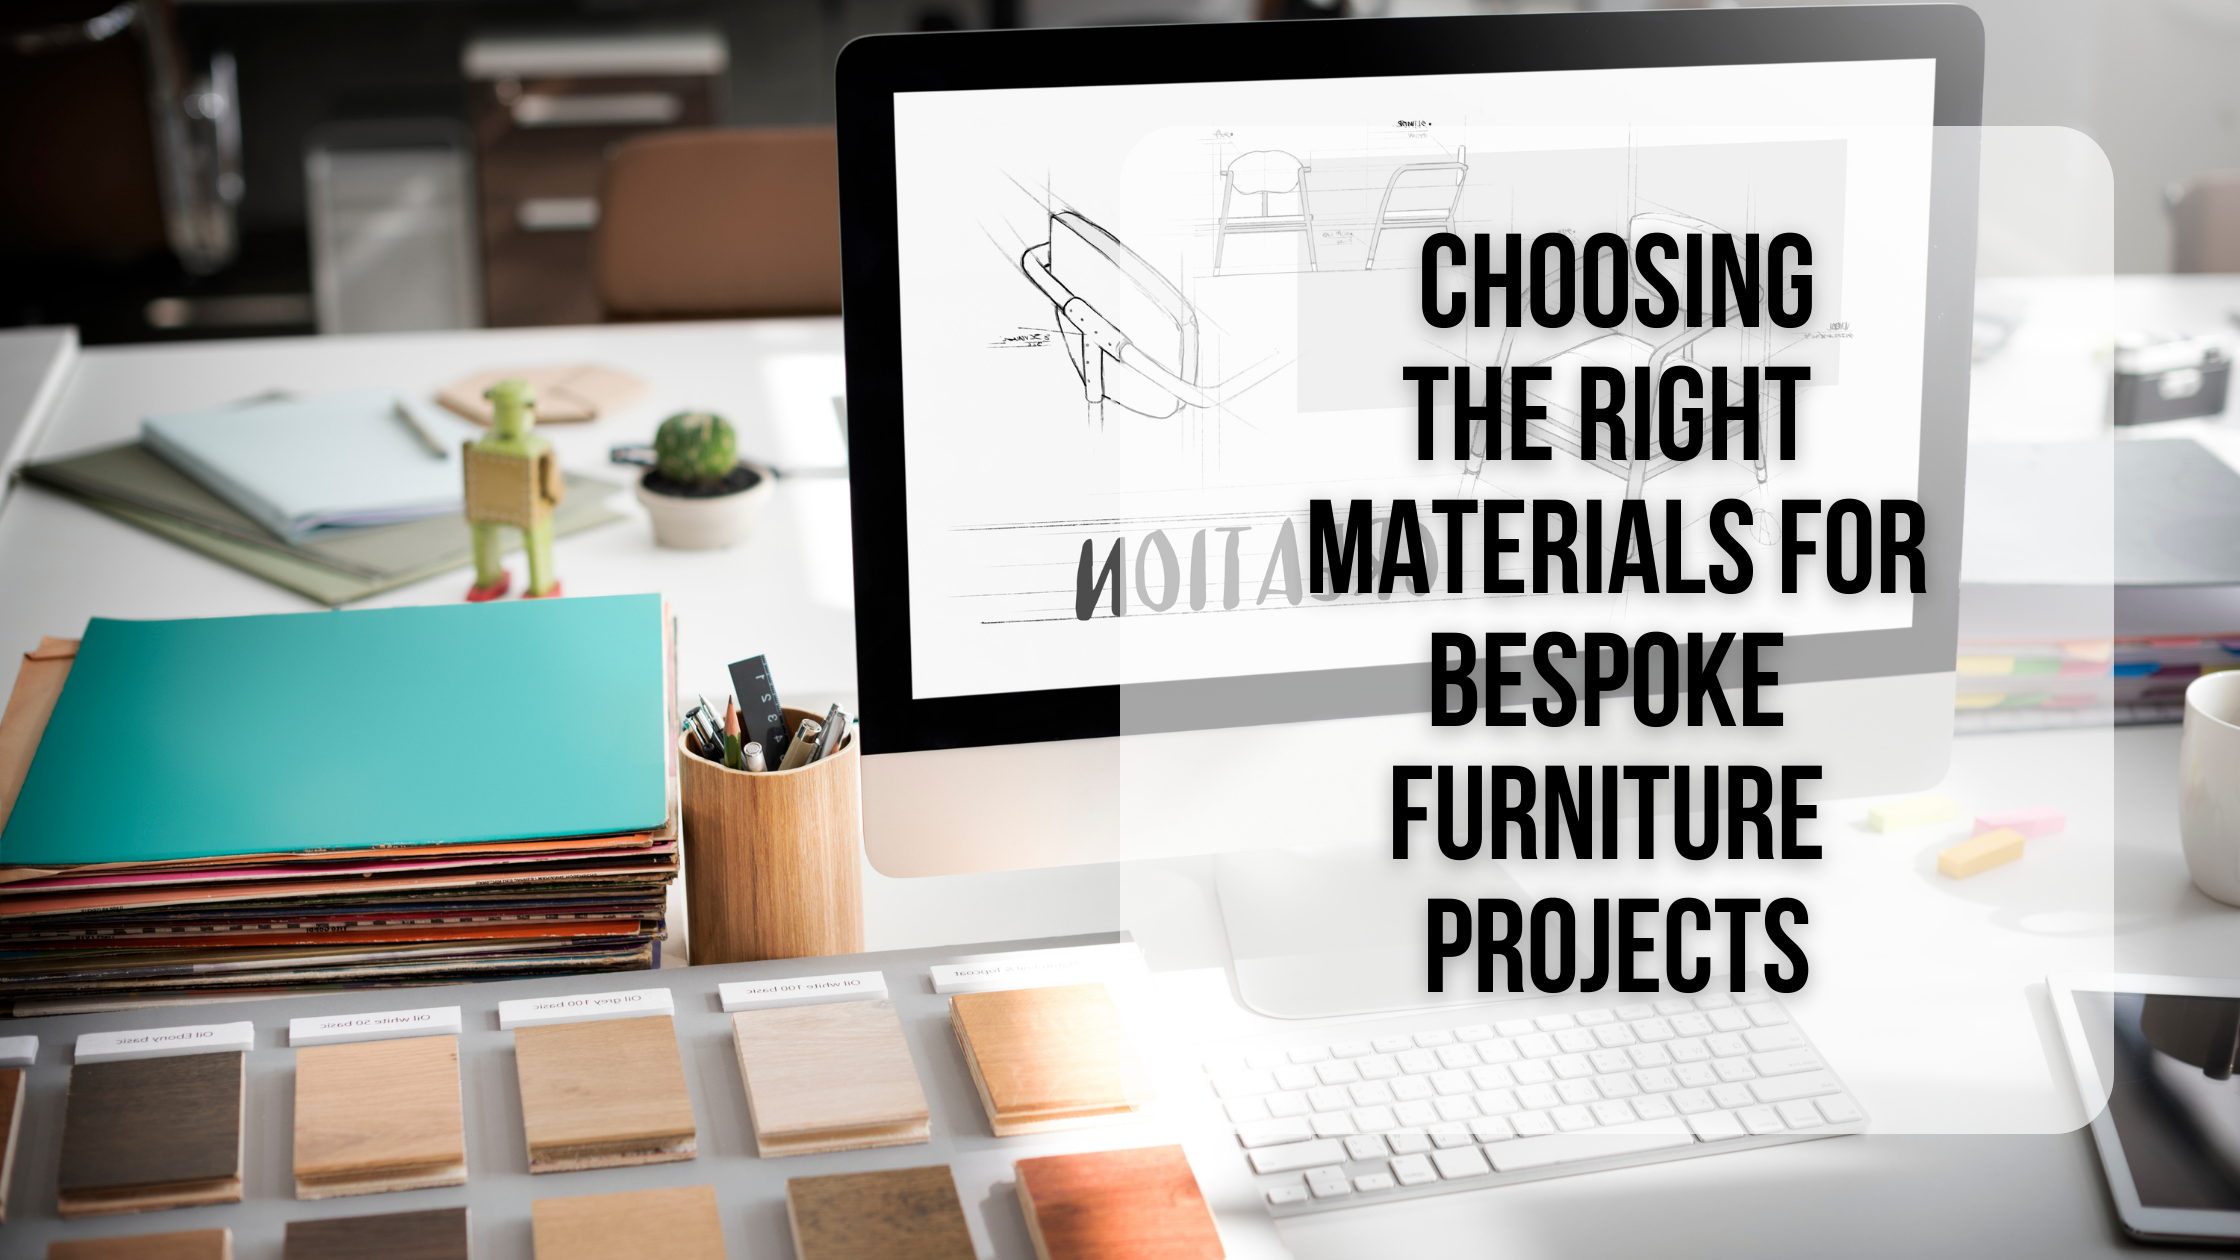 Choosing the right materials for bespoke furniture projects